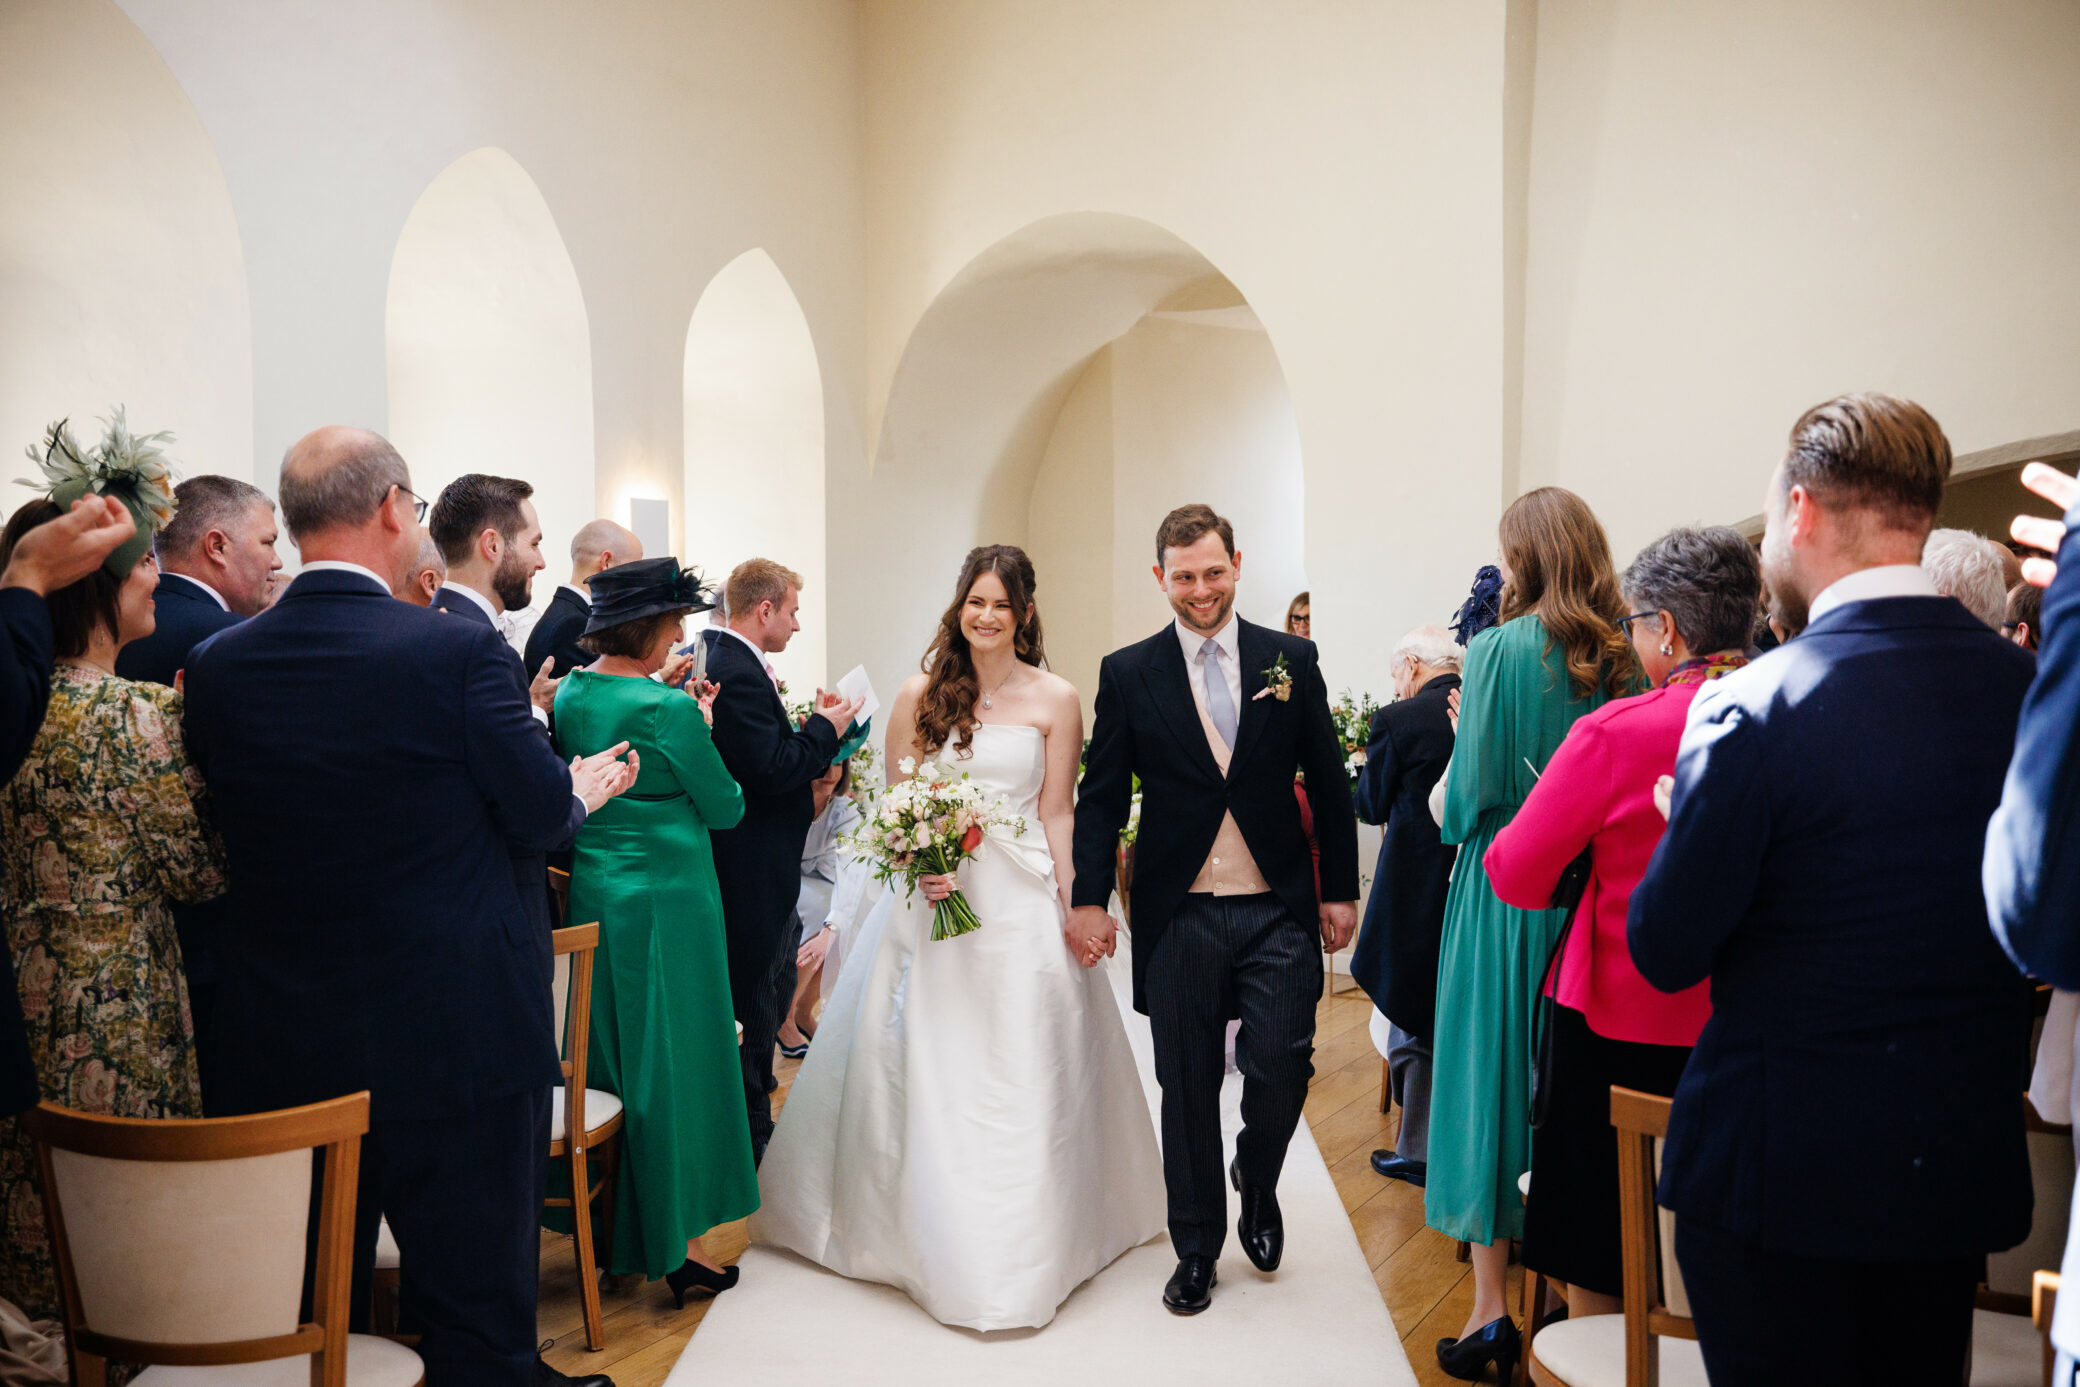 Just Married in the historic Lantern Hall at Farnham Castle